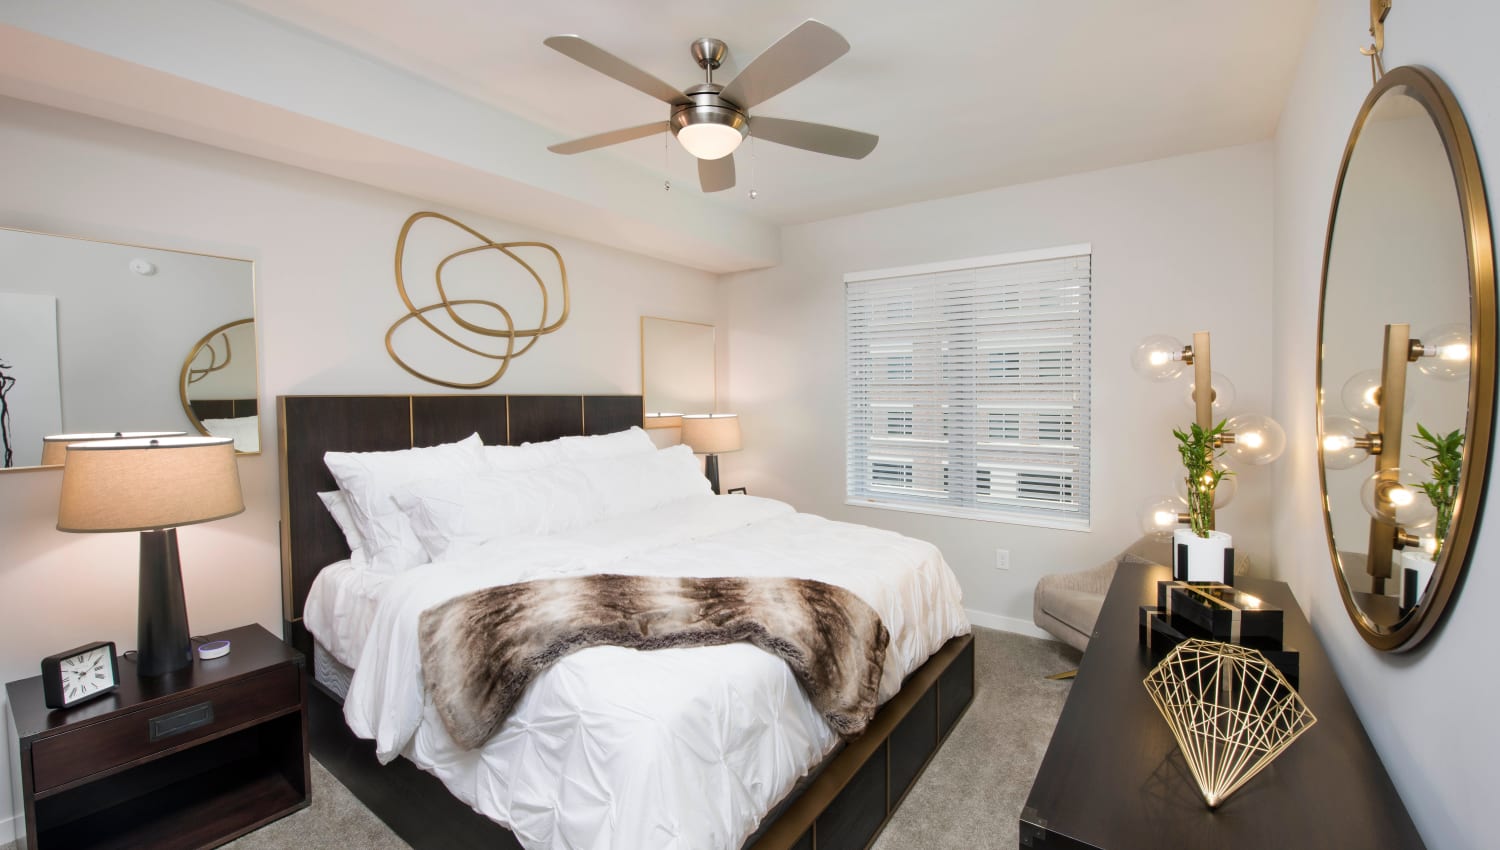 Well-furnished primary bedroom in a model home at Olympus Harbour Island in Tampa, Florida